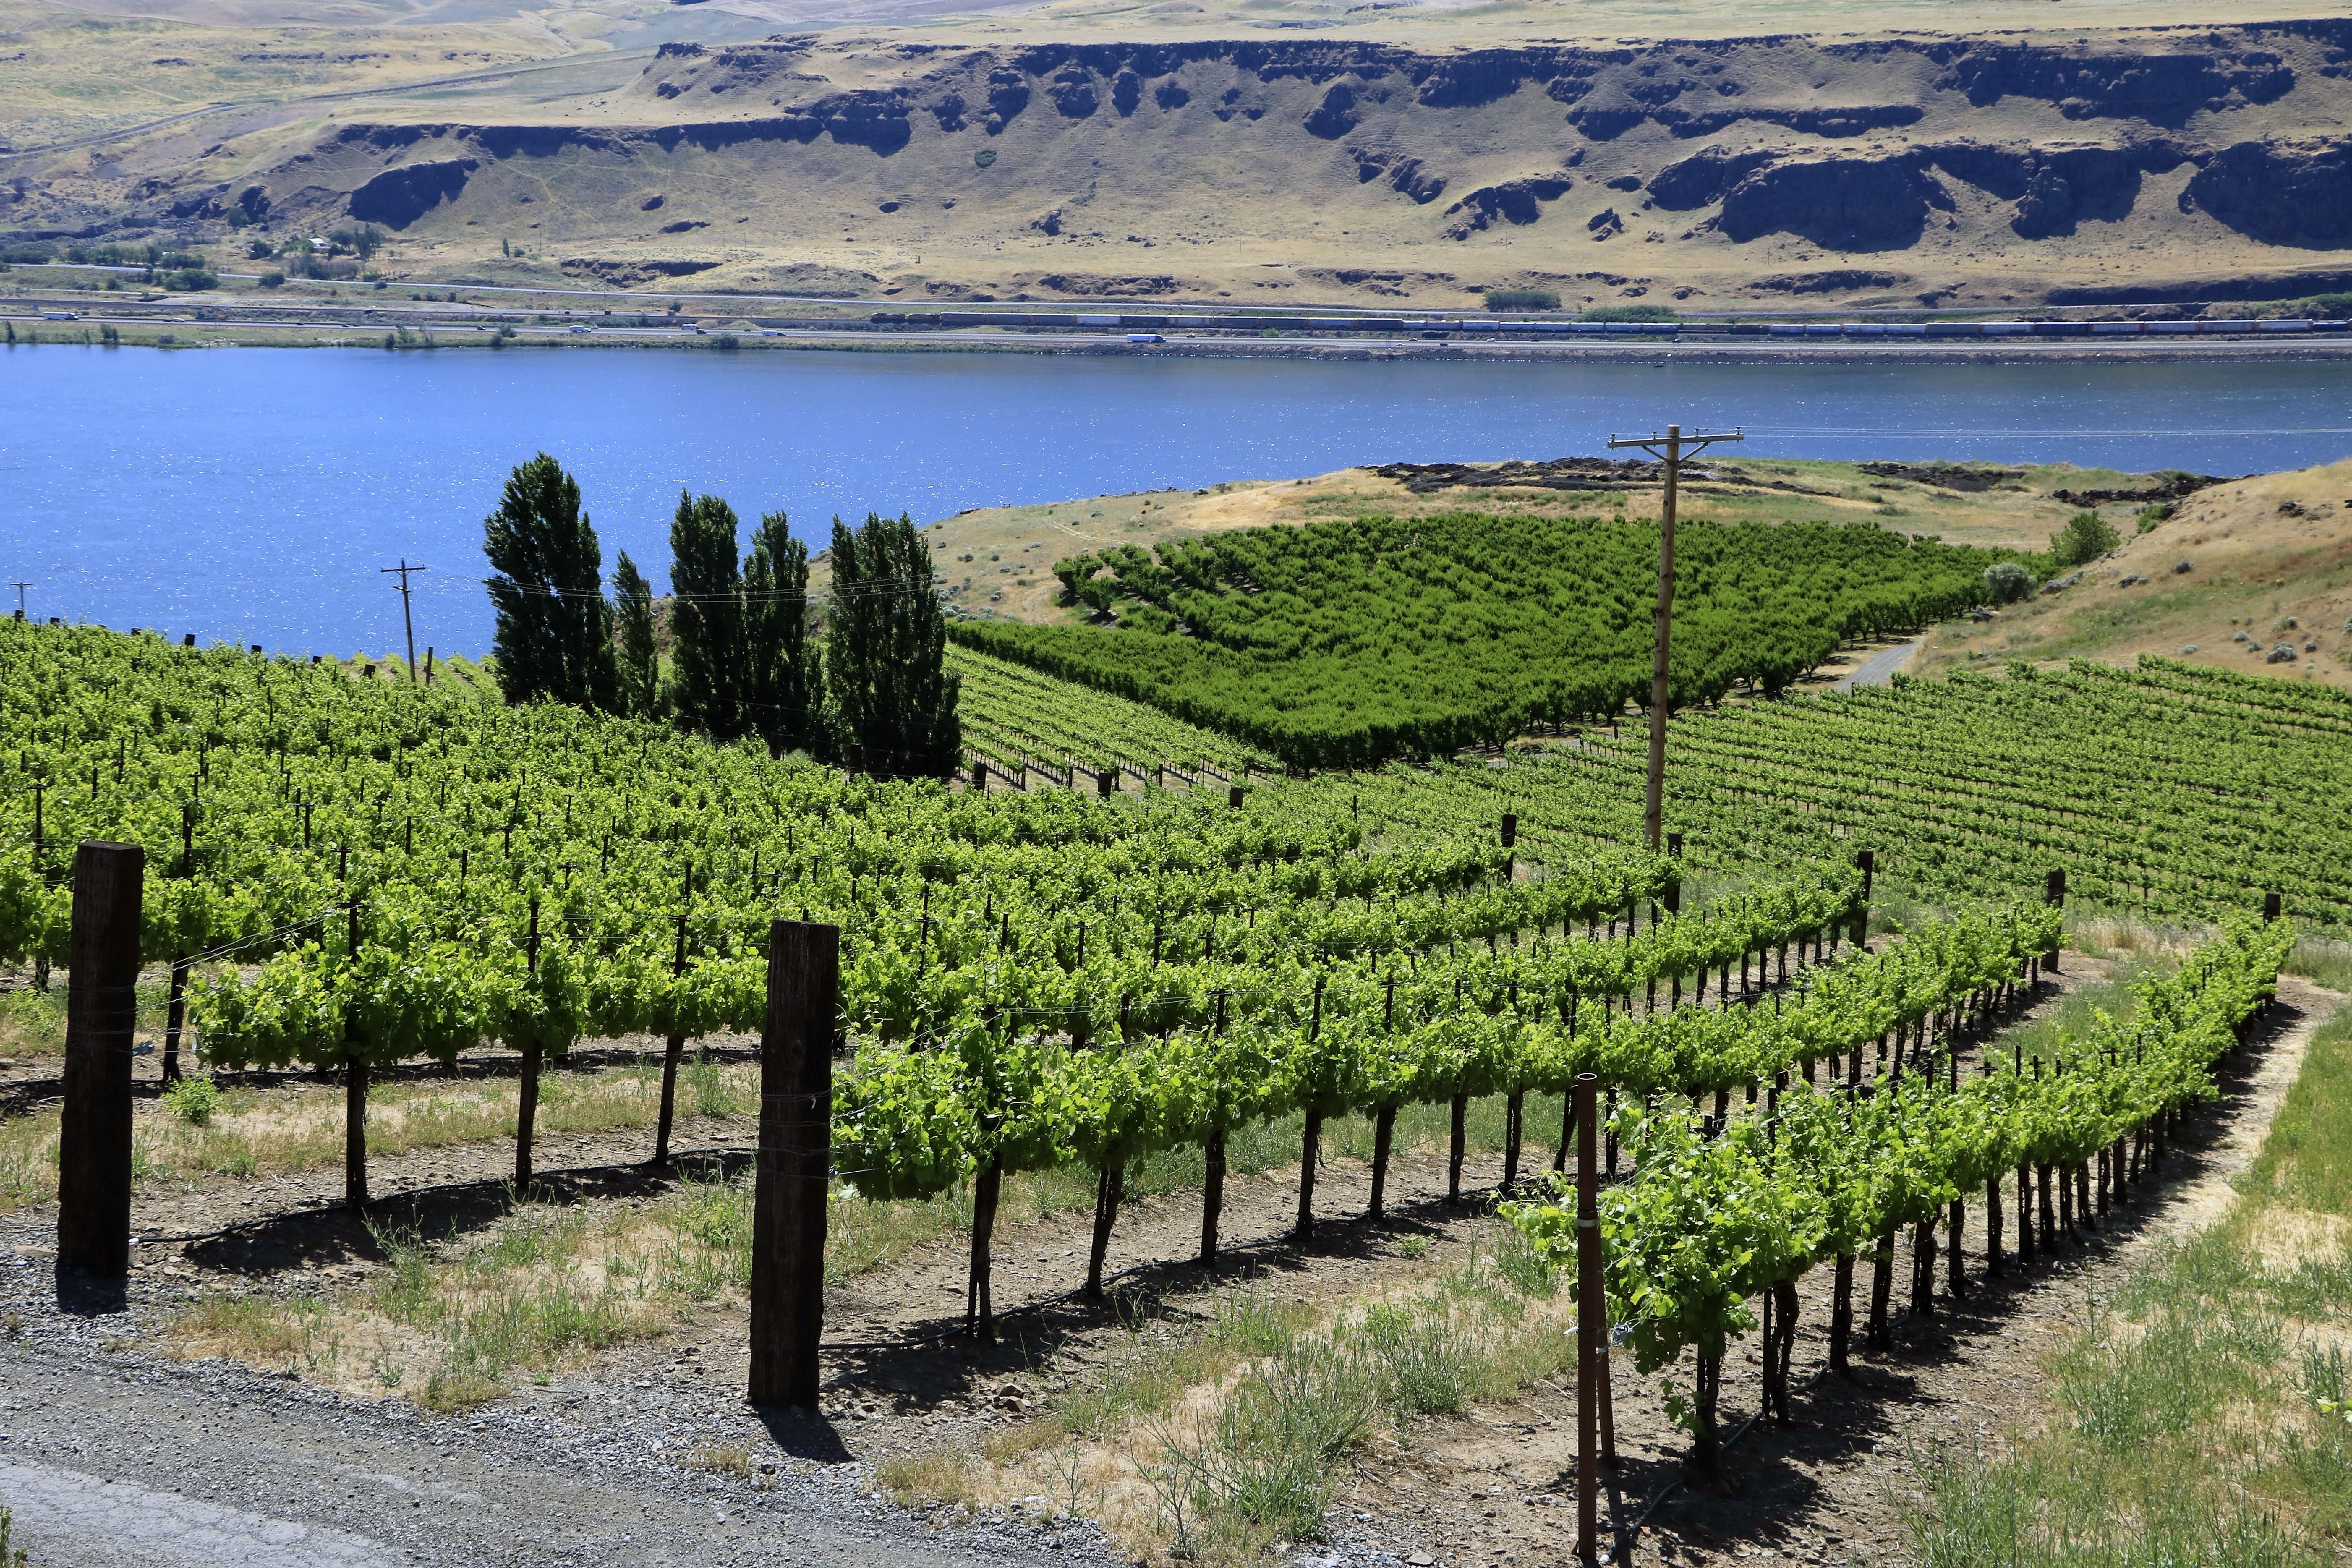 Vineyard on the Washington state side of the Columbia River Gorge